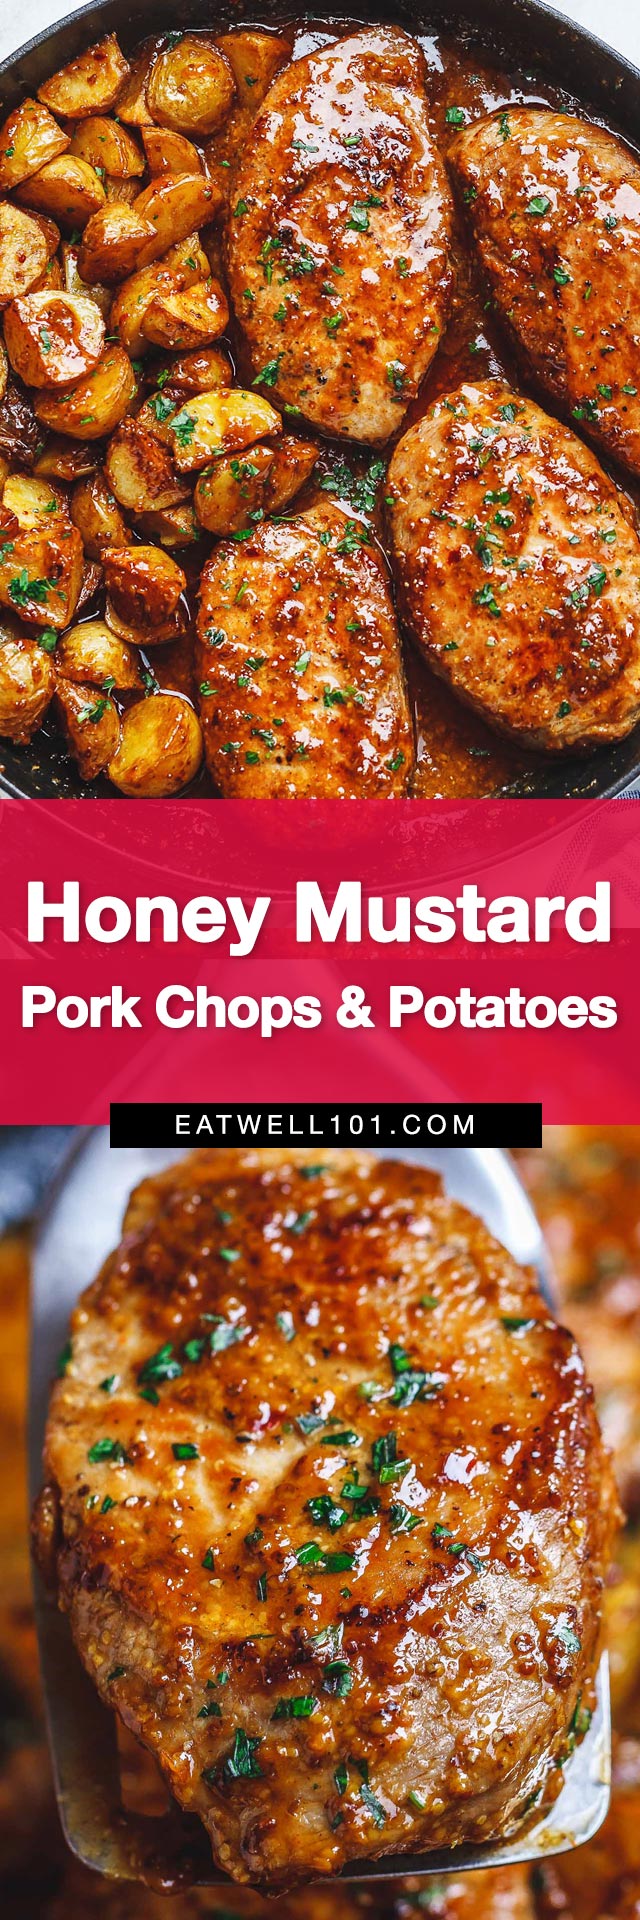 Honey Mustard Pork Chops and Potatoes Skillet - #eatwell101 #recipe Best ever melt in your mouth, super delicious #pork #chops #recipe!